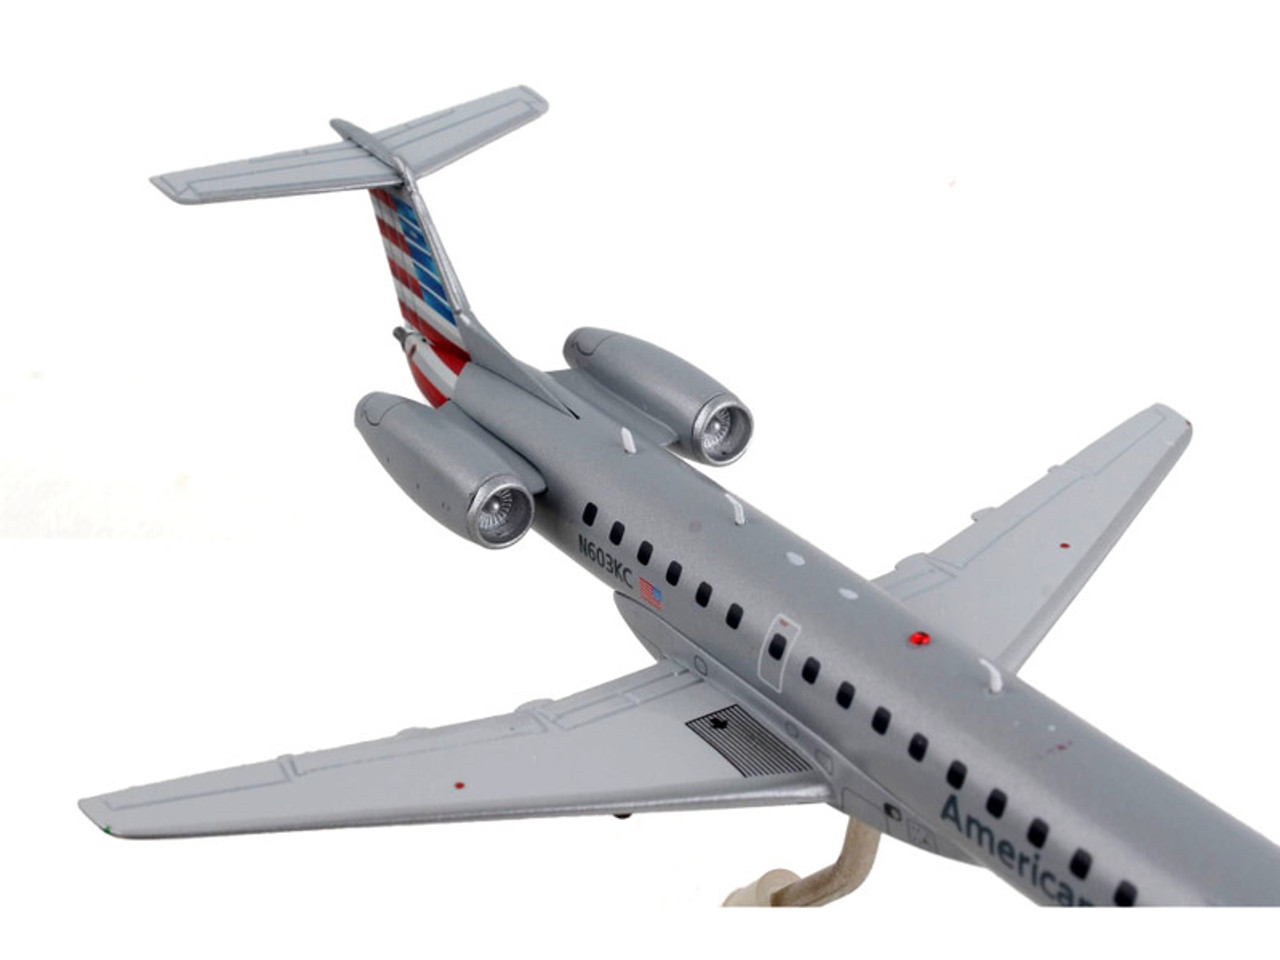 Embraer ERJ-145 Commercial Aircraft "American Airlines - American Eagle" Gray with Striped Tail "Gemini 200" Series 1/200 Diecast Model Airplane by GeminiJets